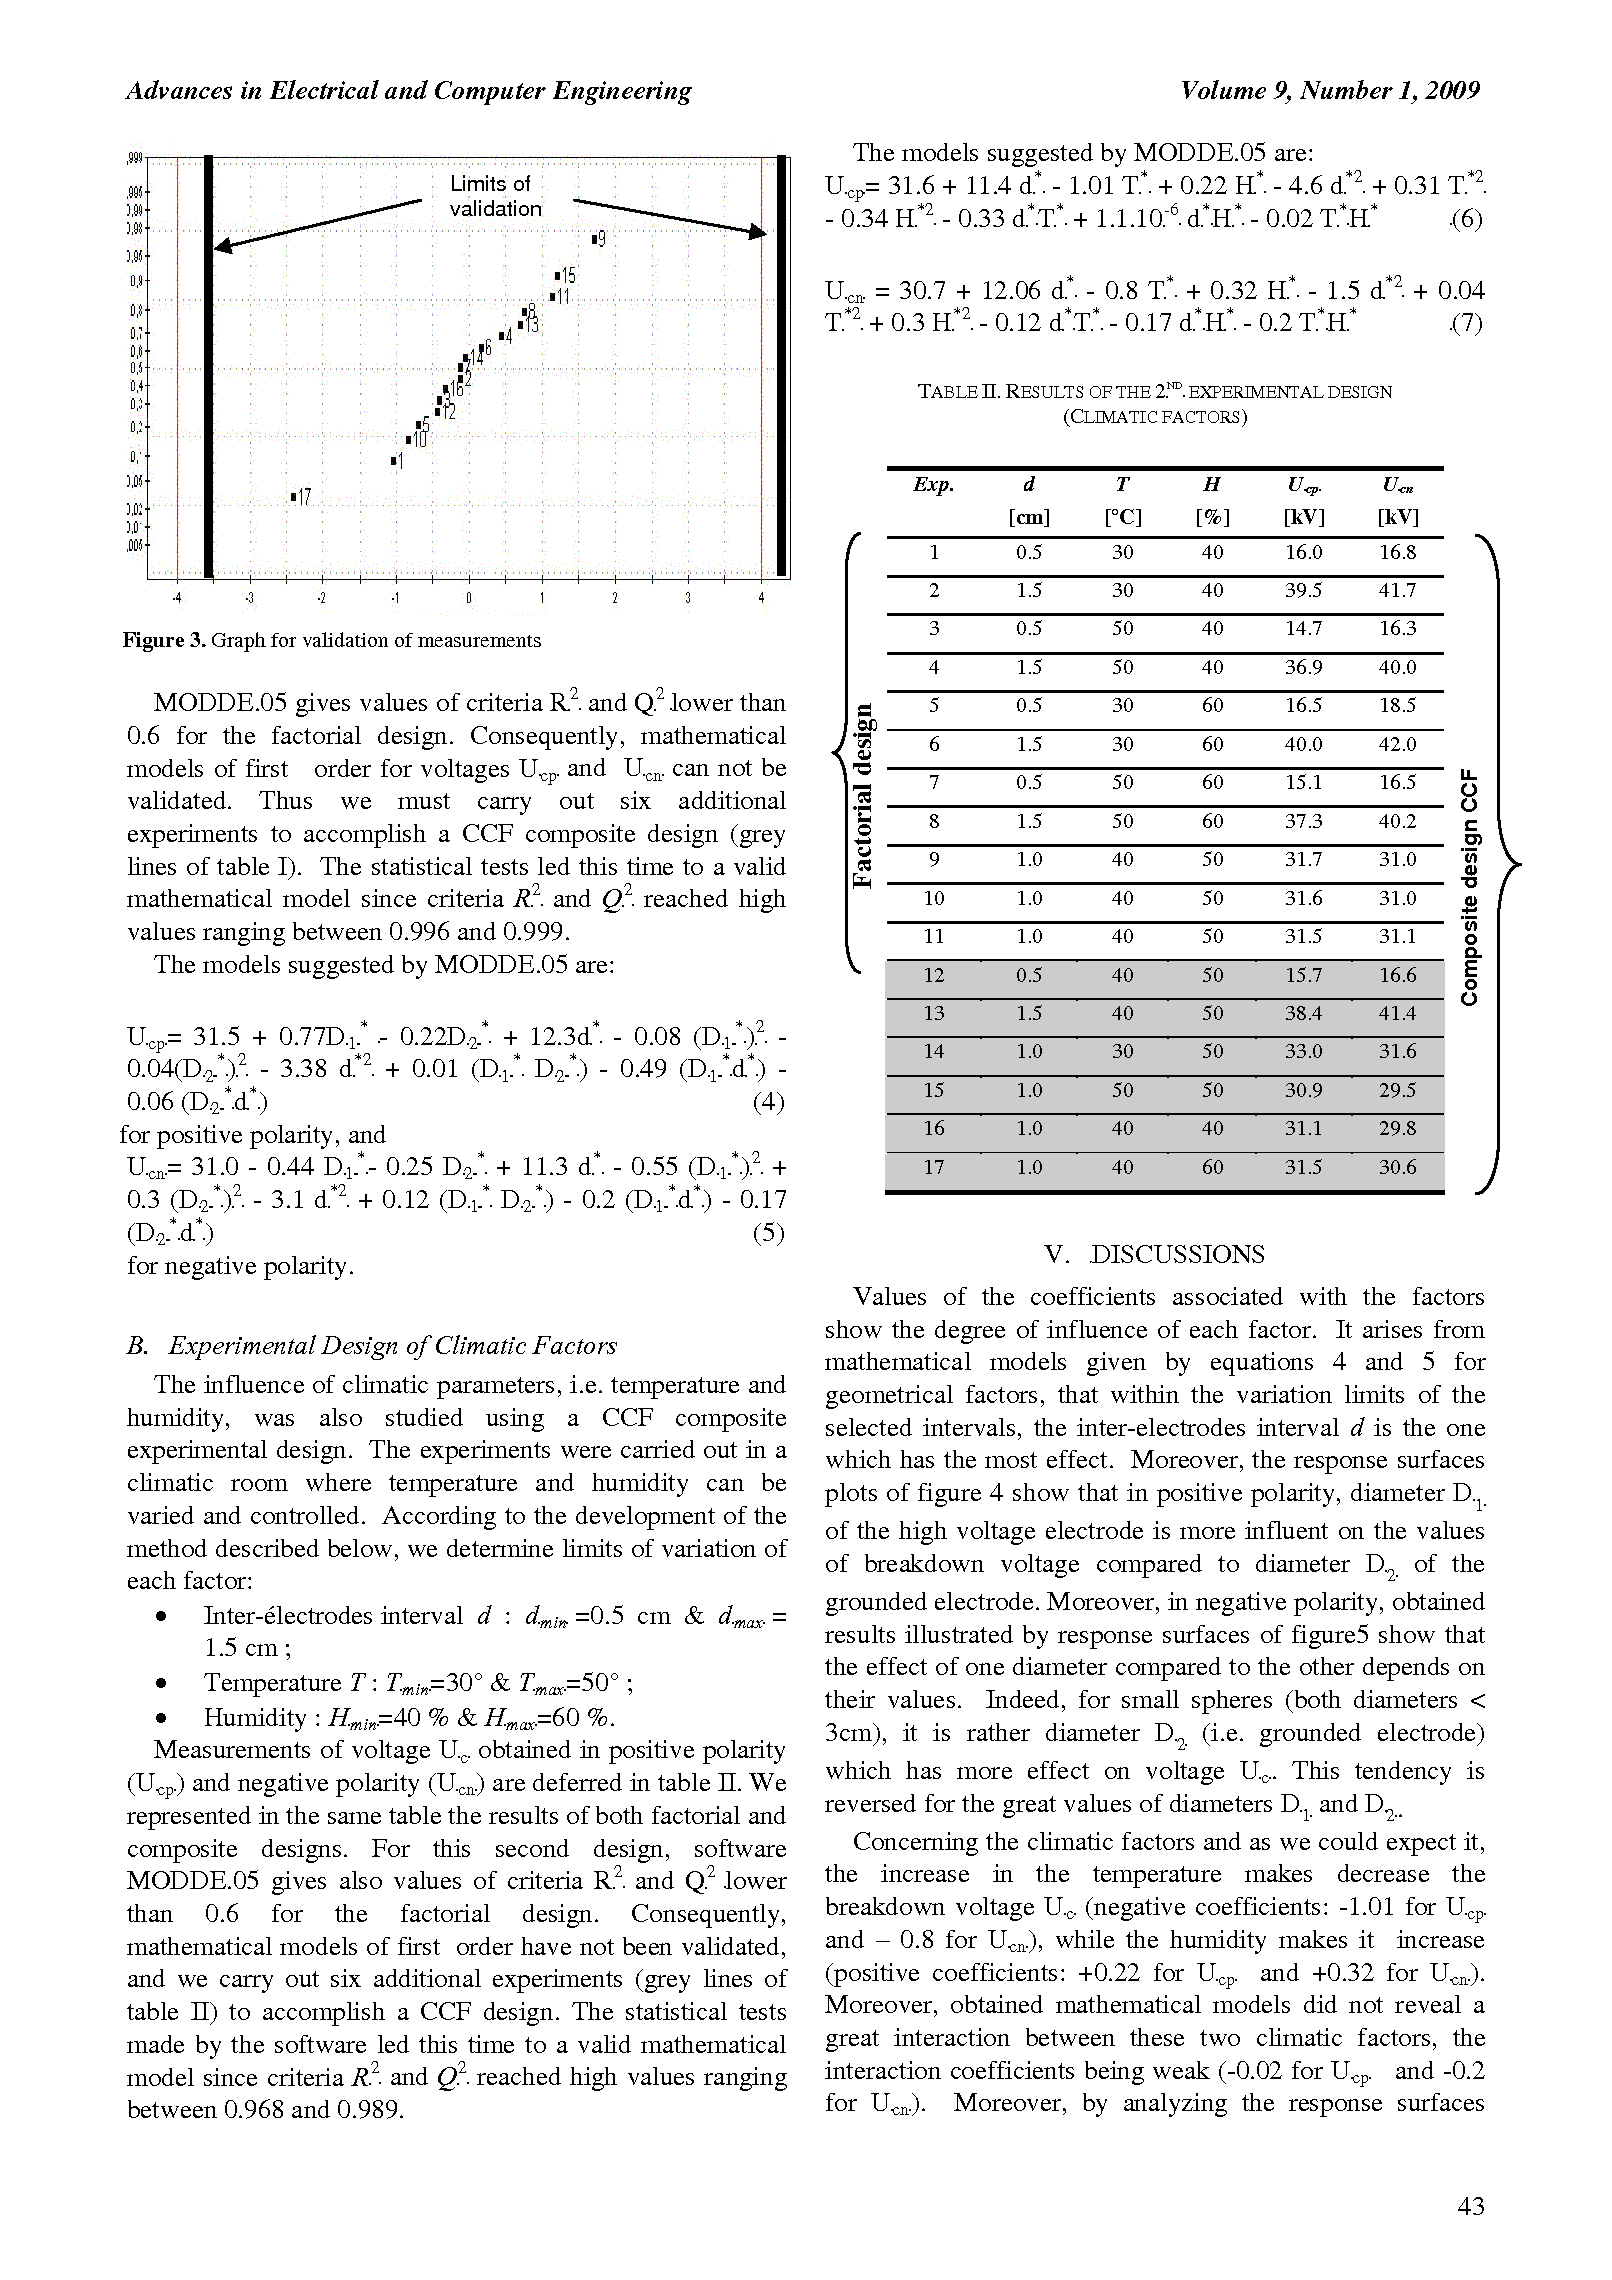 PDF Quickview for paper with DOI:10.4316/AECE.2009.01007